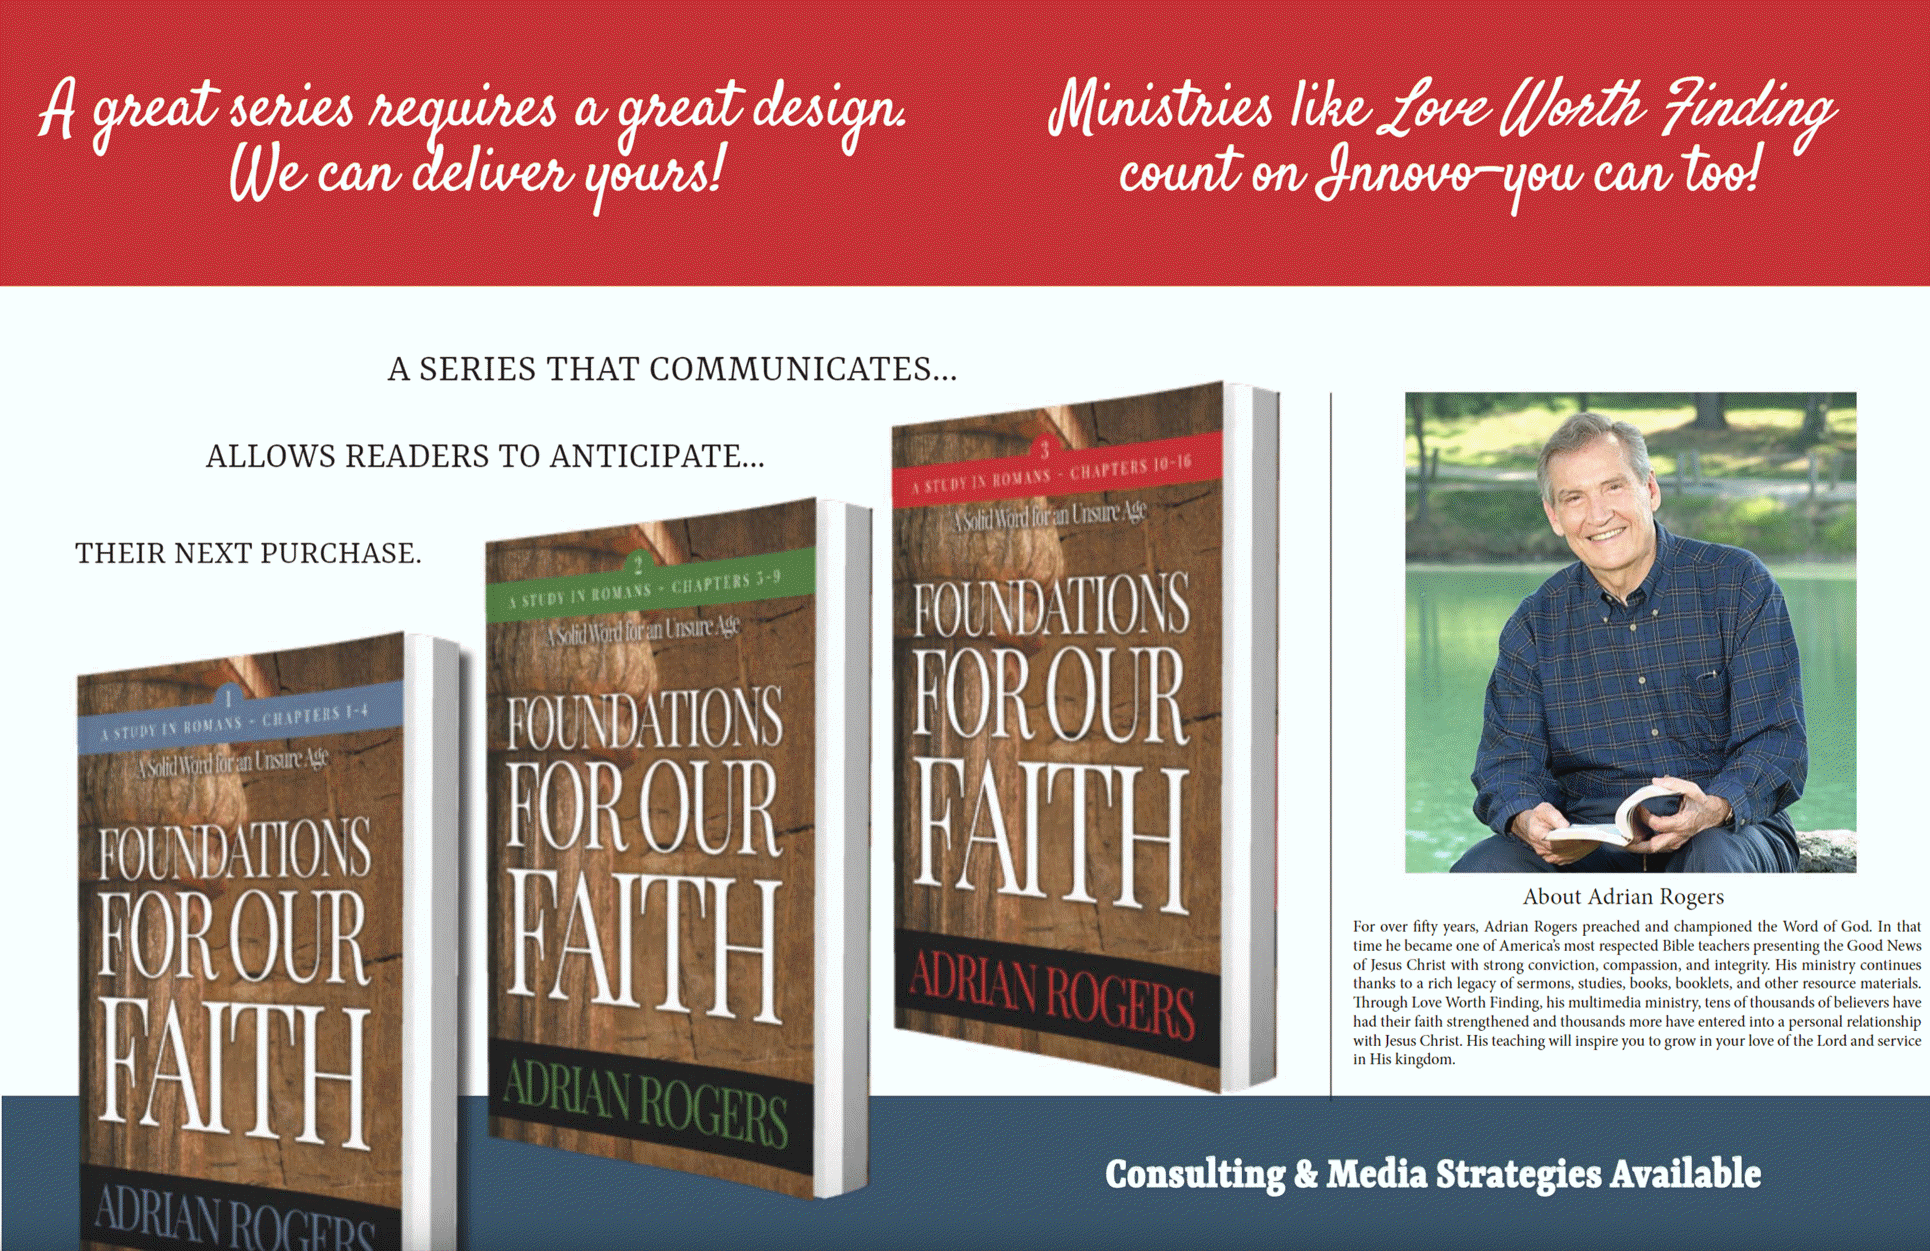 Innovo's Book Series Design and Publishing for Christian Authors, Artists, and Ministries